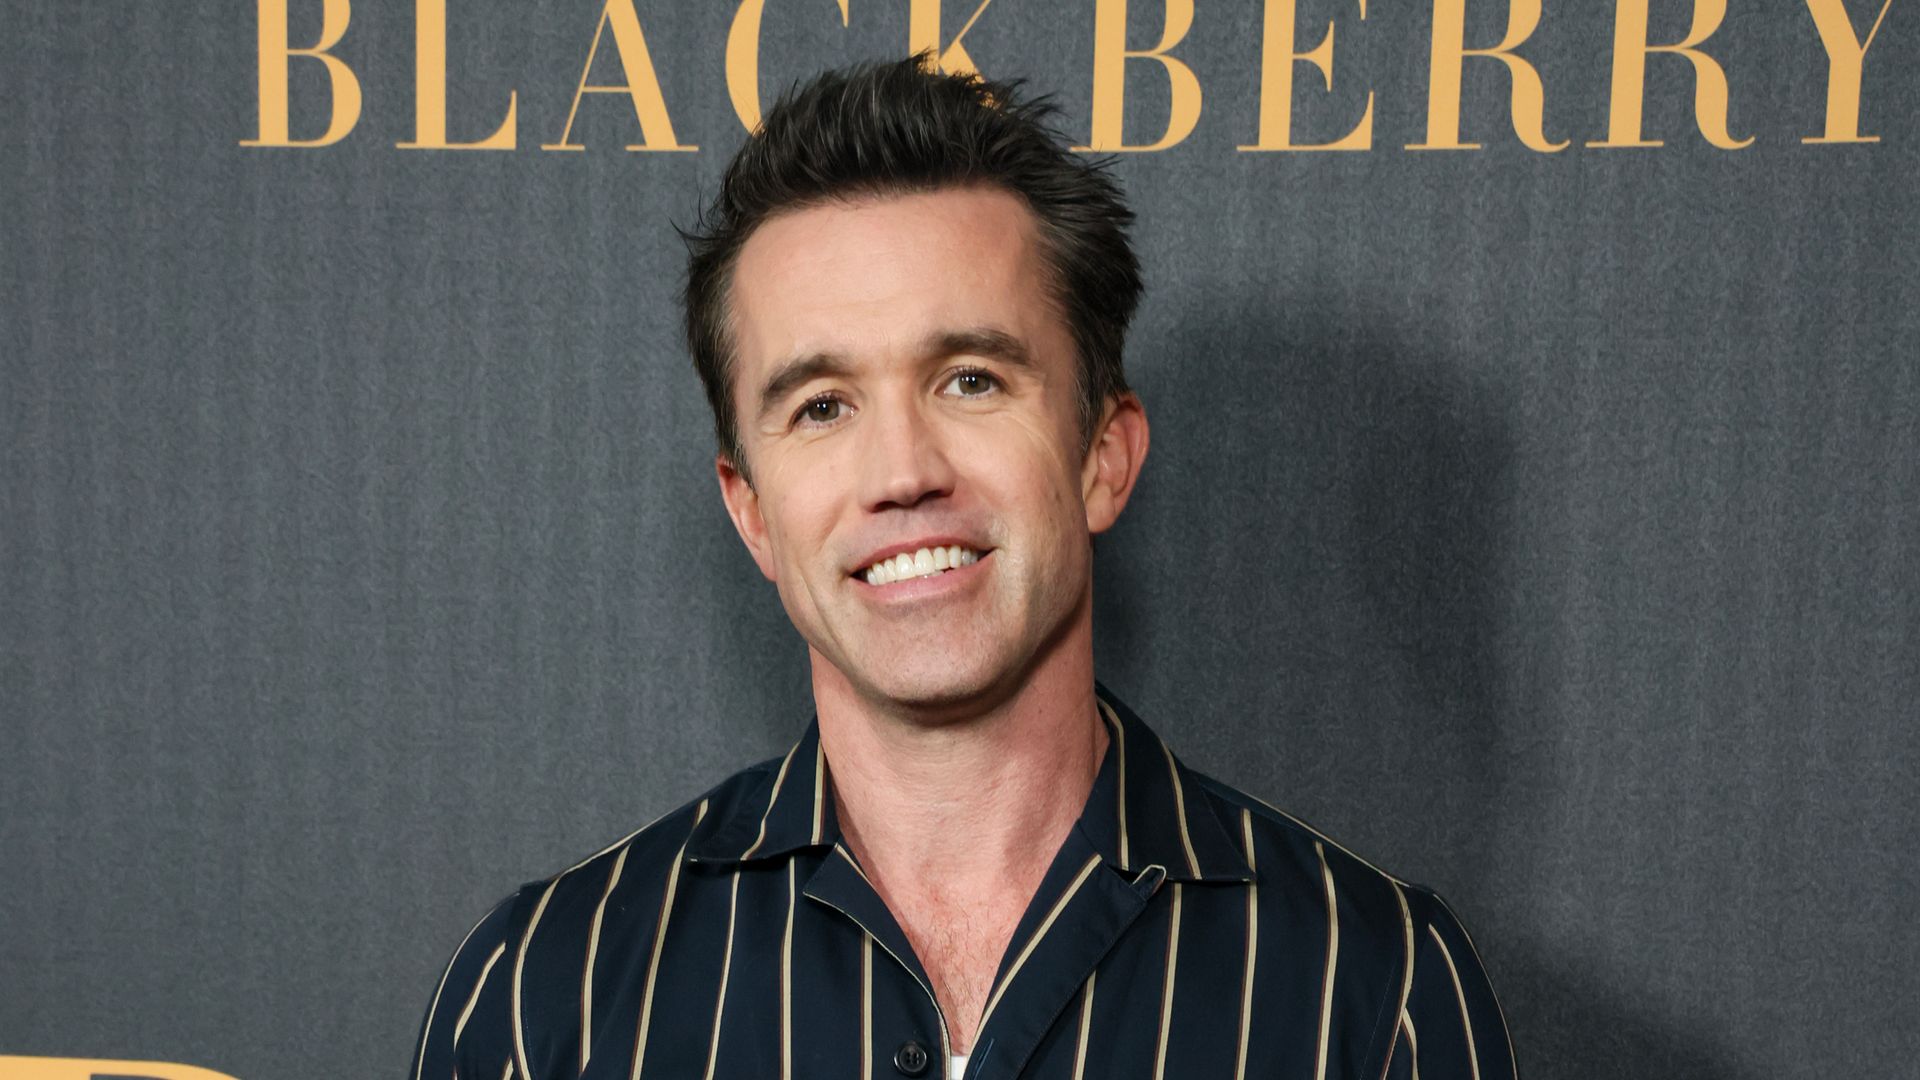 Rob McElhenney attends the Los Angeles premiere of "Blackberry" 